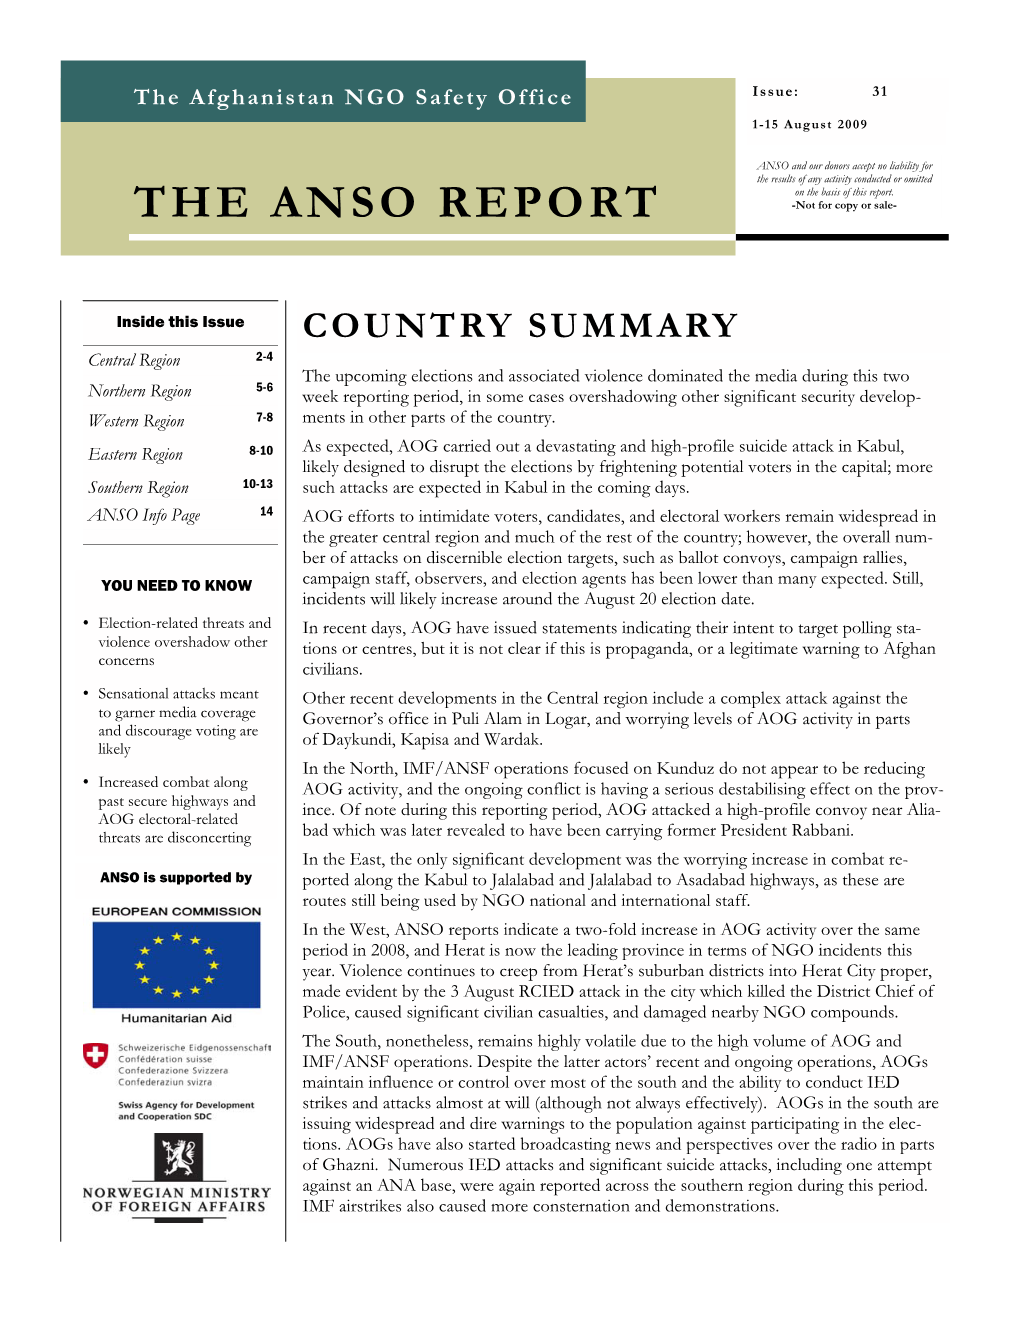 THE ANSO REPORT (1-15 August 2009)